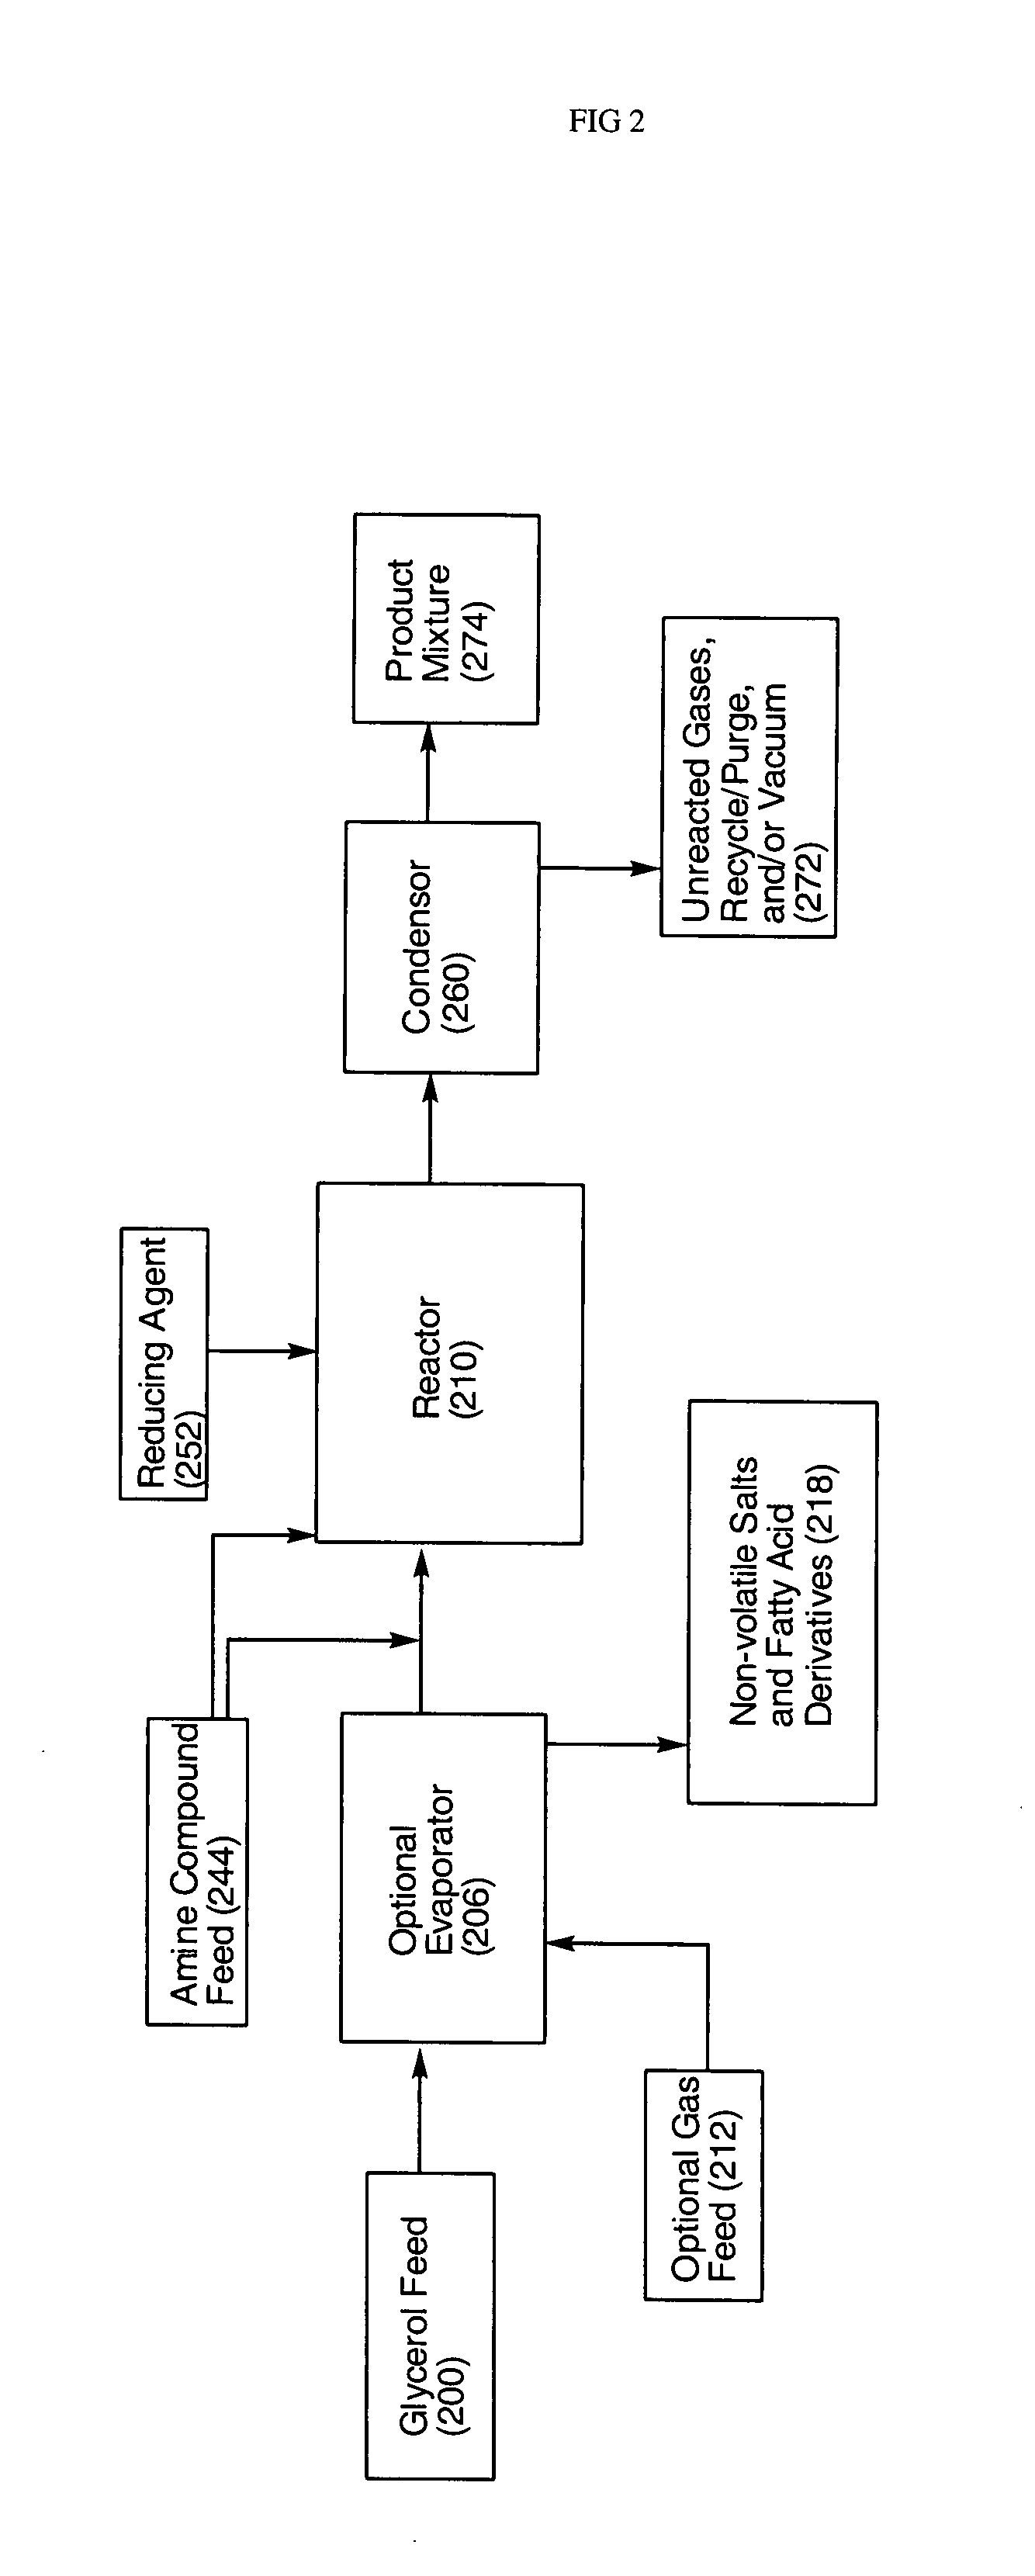 Process for the conversion of glycerol to propylene glycol and amino alcohols